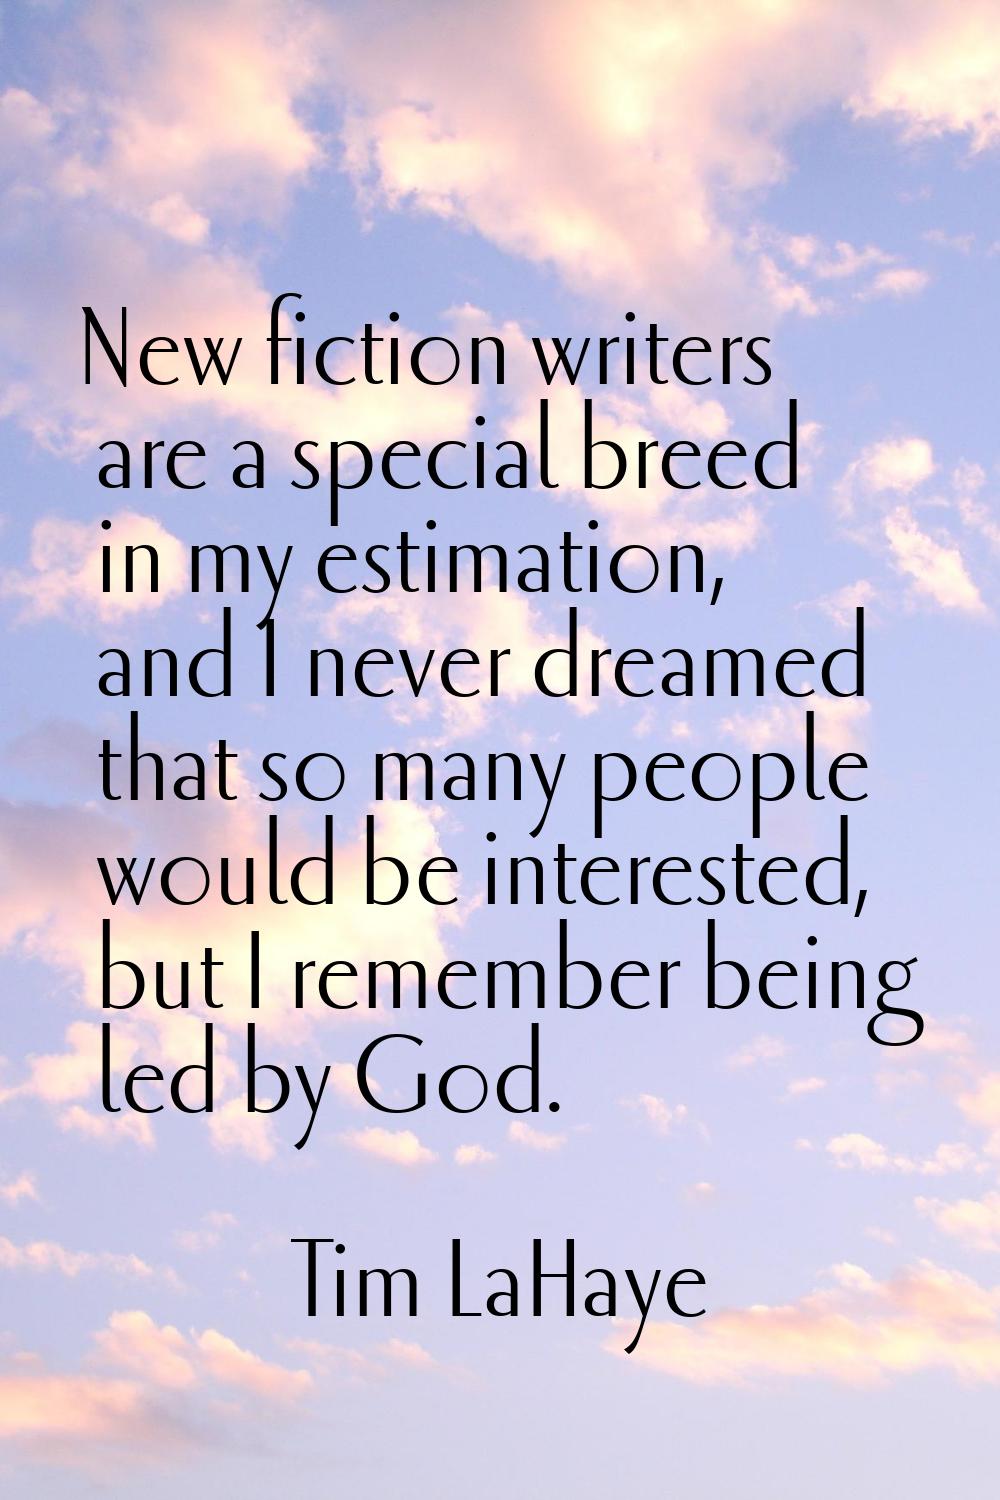 New fiction writers are a special breed in my estimation, and I never dreamed that so many people w